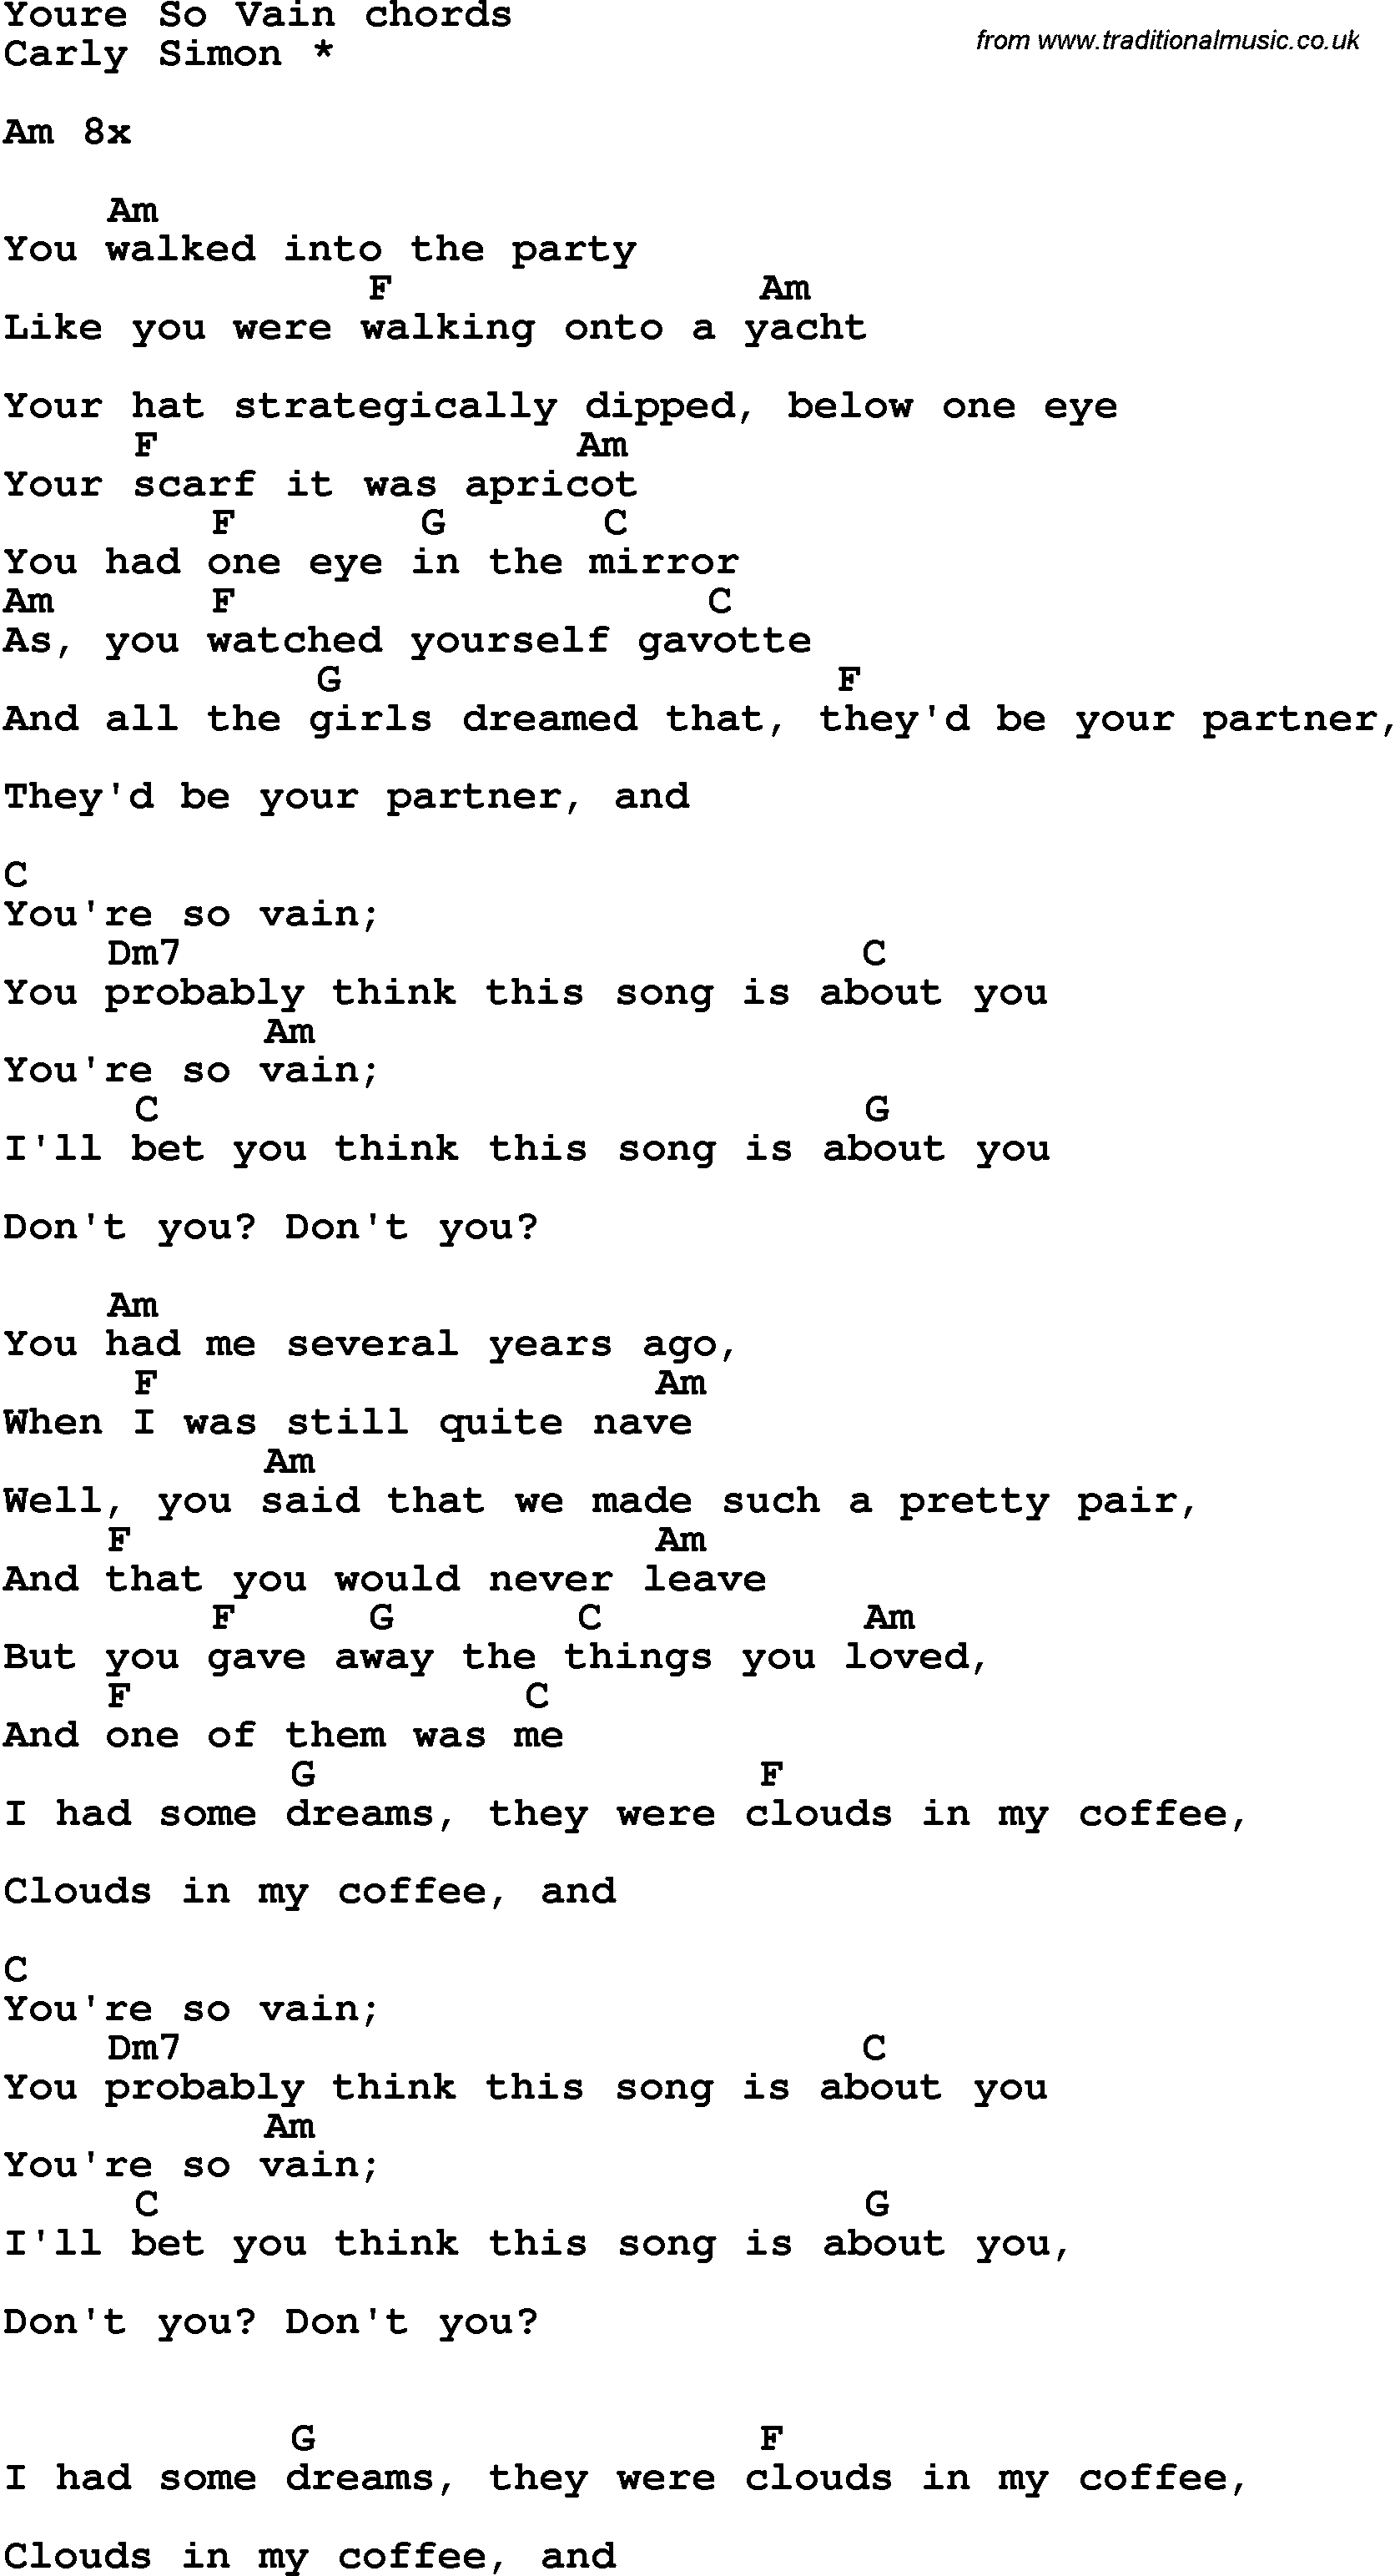 Song Lyrics with guitar chords for You're So Vain